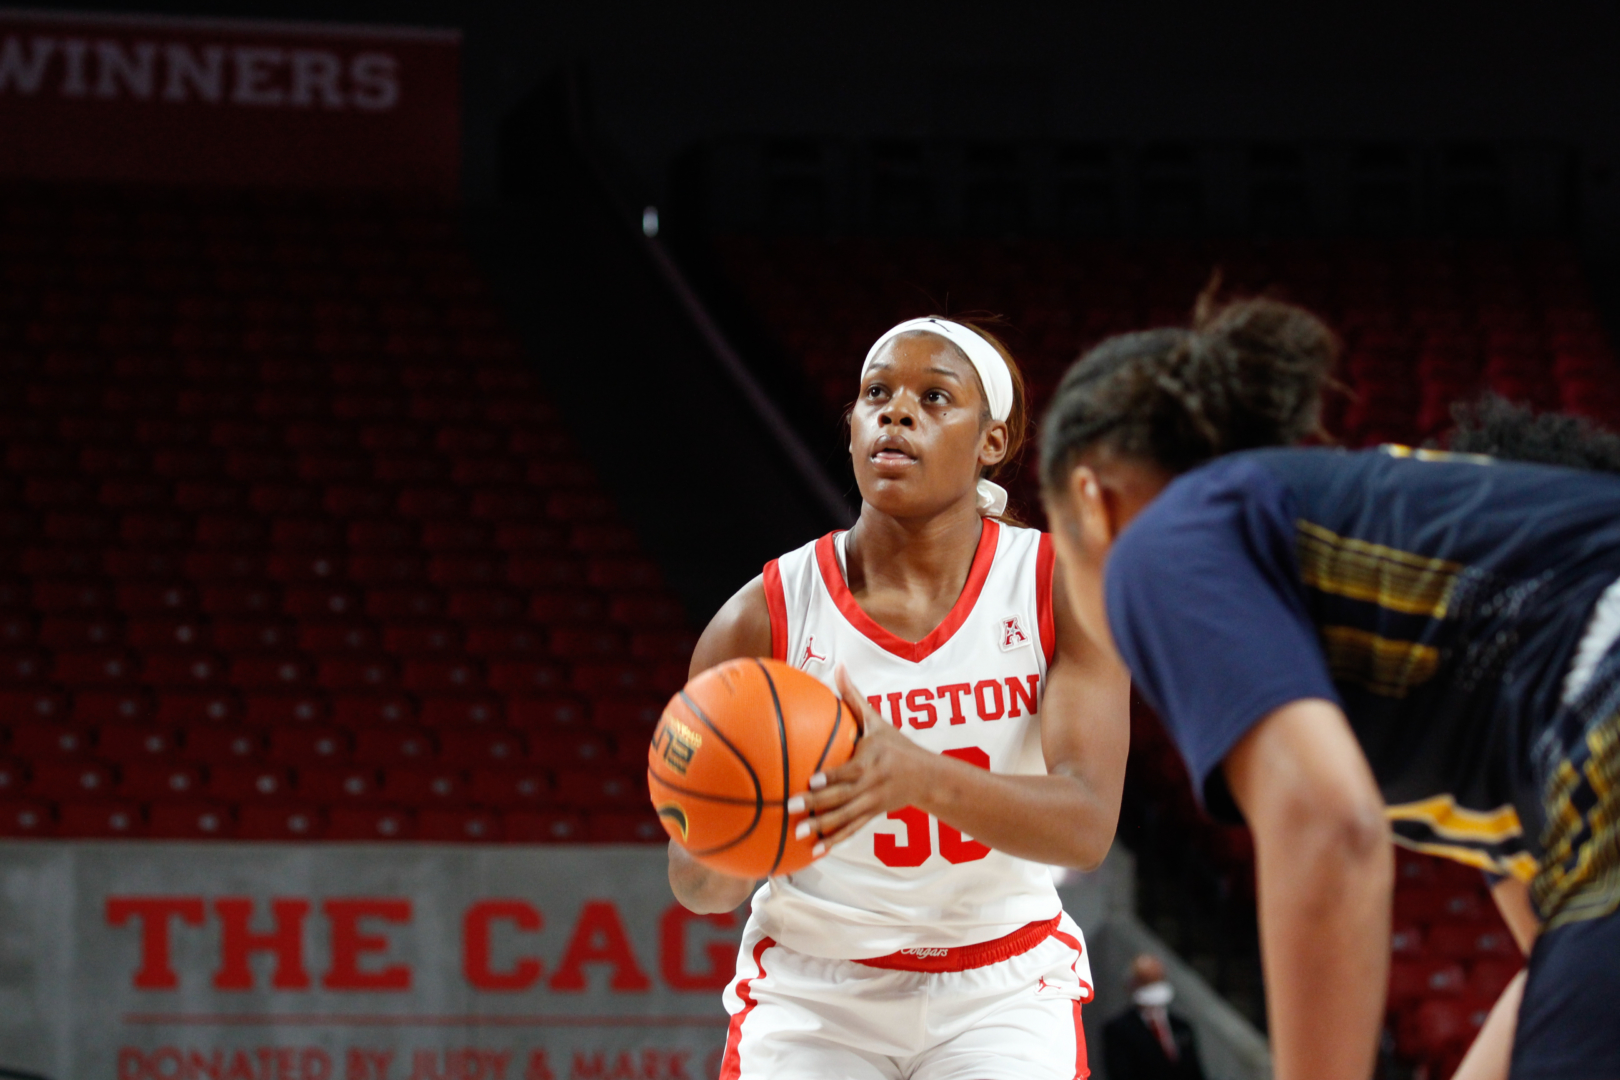 Senior forward Tatyana Hill pulled down a team-high 17 rebounds in UH's loss to SFA on Friday night. | Esther Umoh/The Cougar